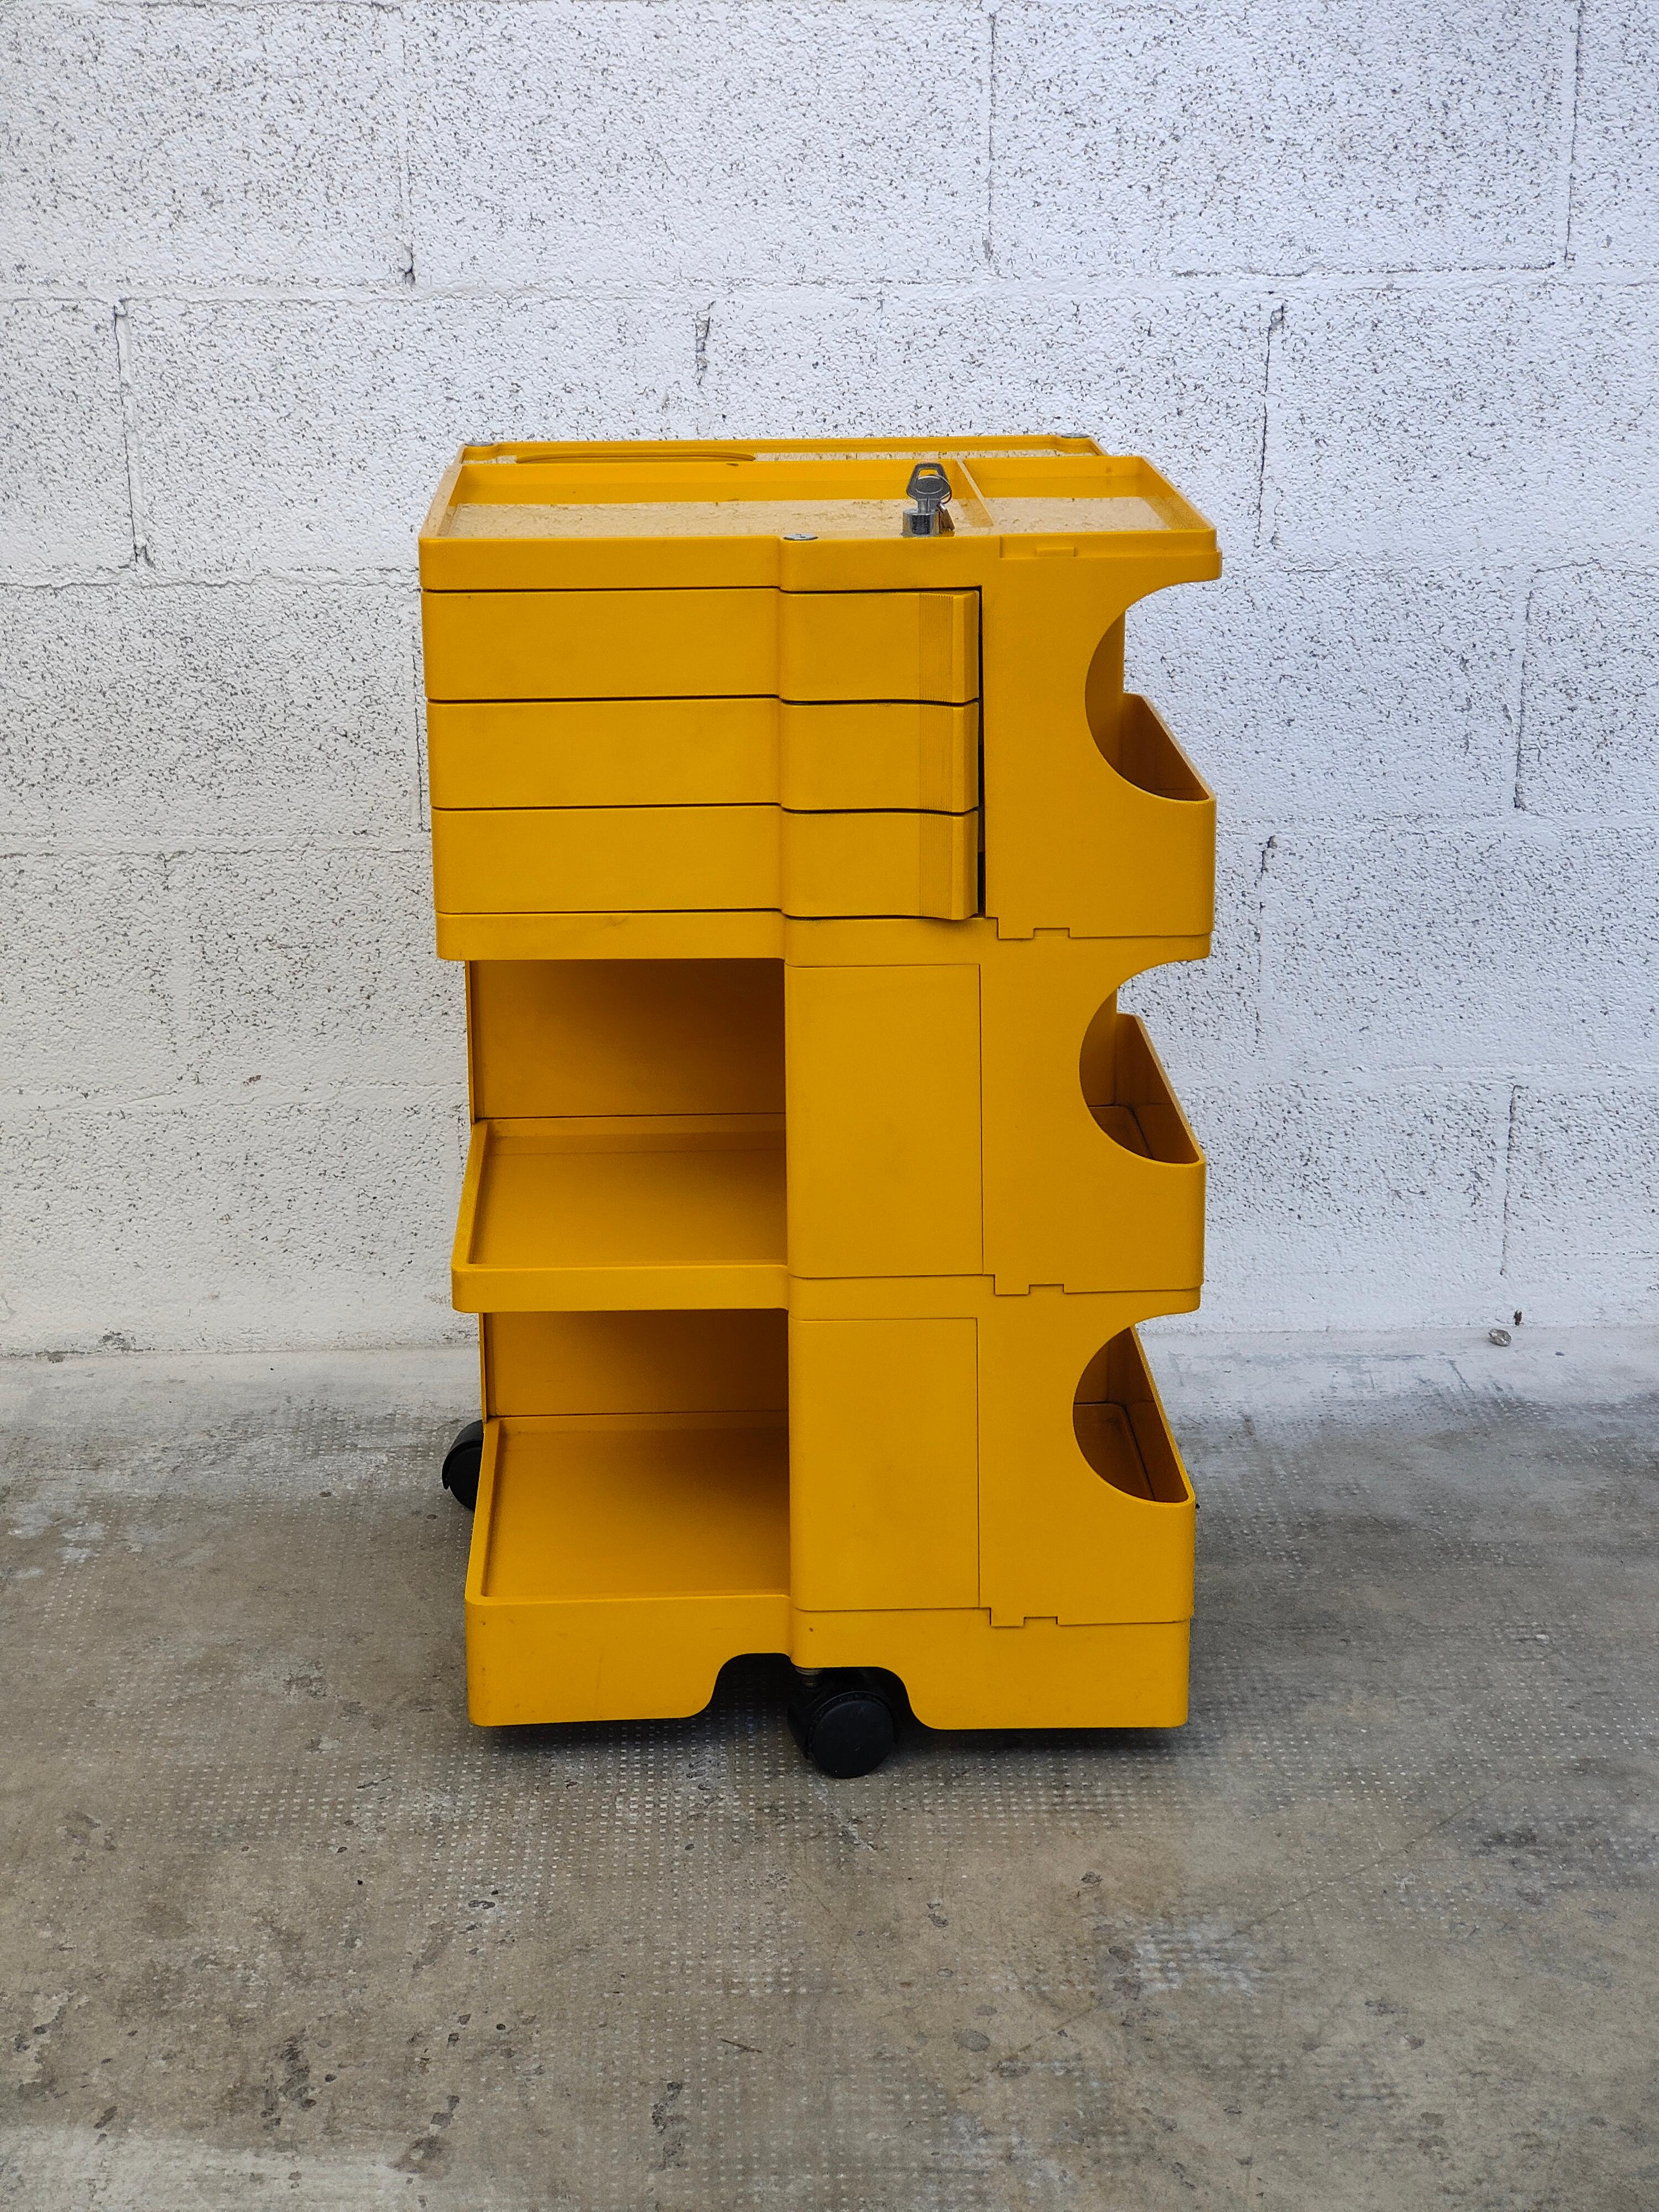 Iconic Boby cart in very rare yellow color designed by Joe Colombo and produced by Bieffeplast 1970s .
This “Boby” trolley or portable storage system was designed by Joe Colombo in 1969. 
A very handy trolley made of ABS plastic. It has many